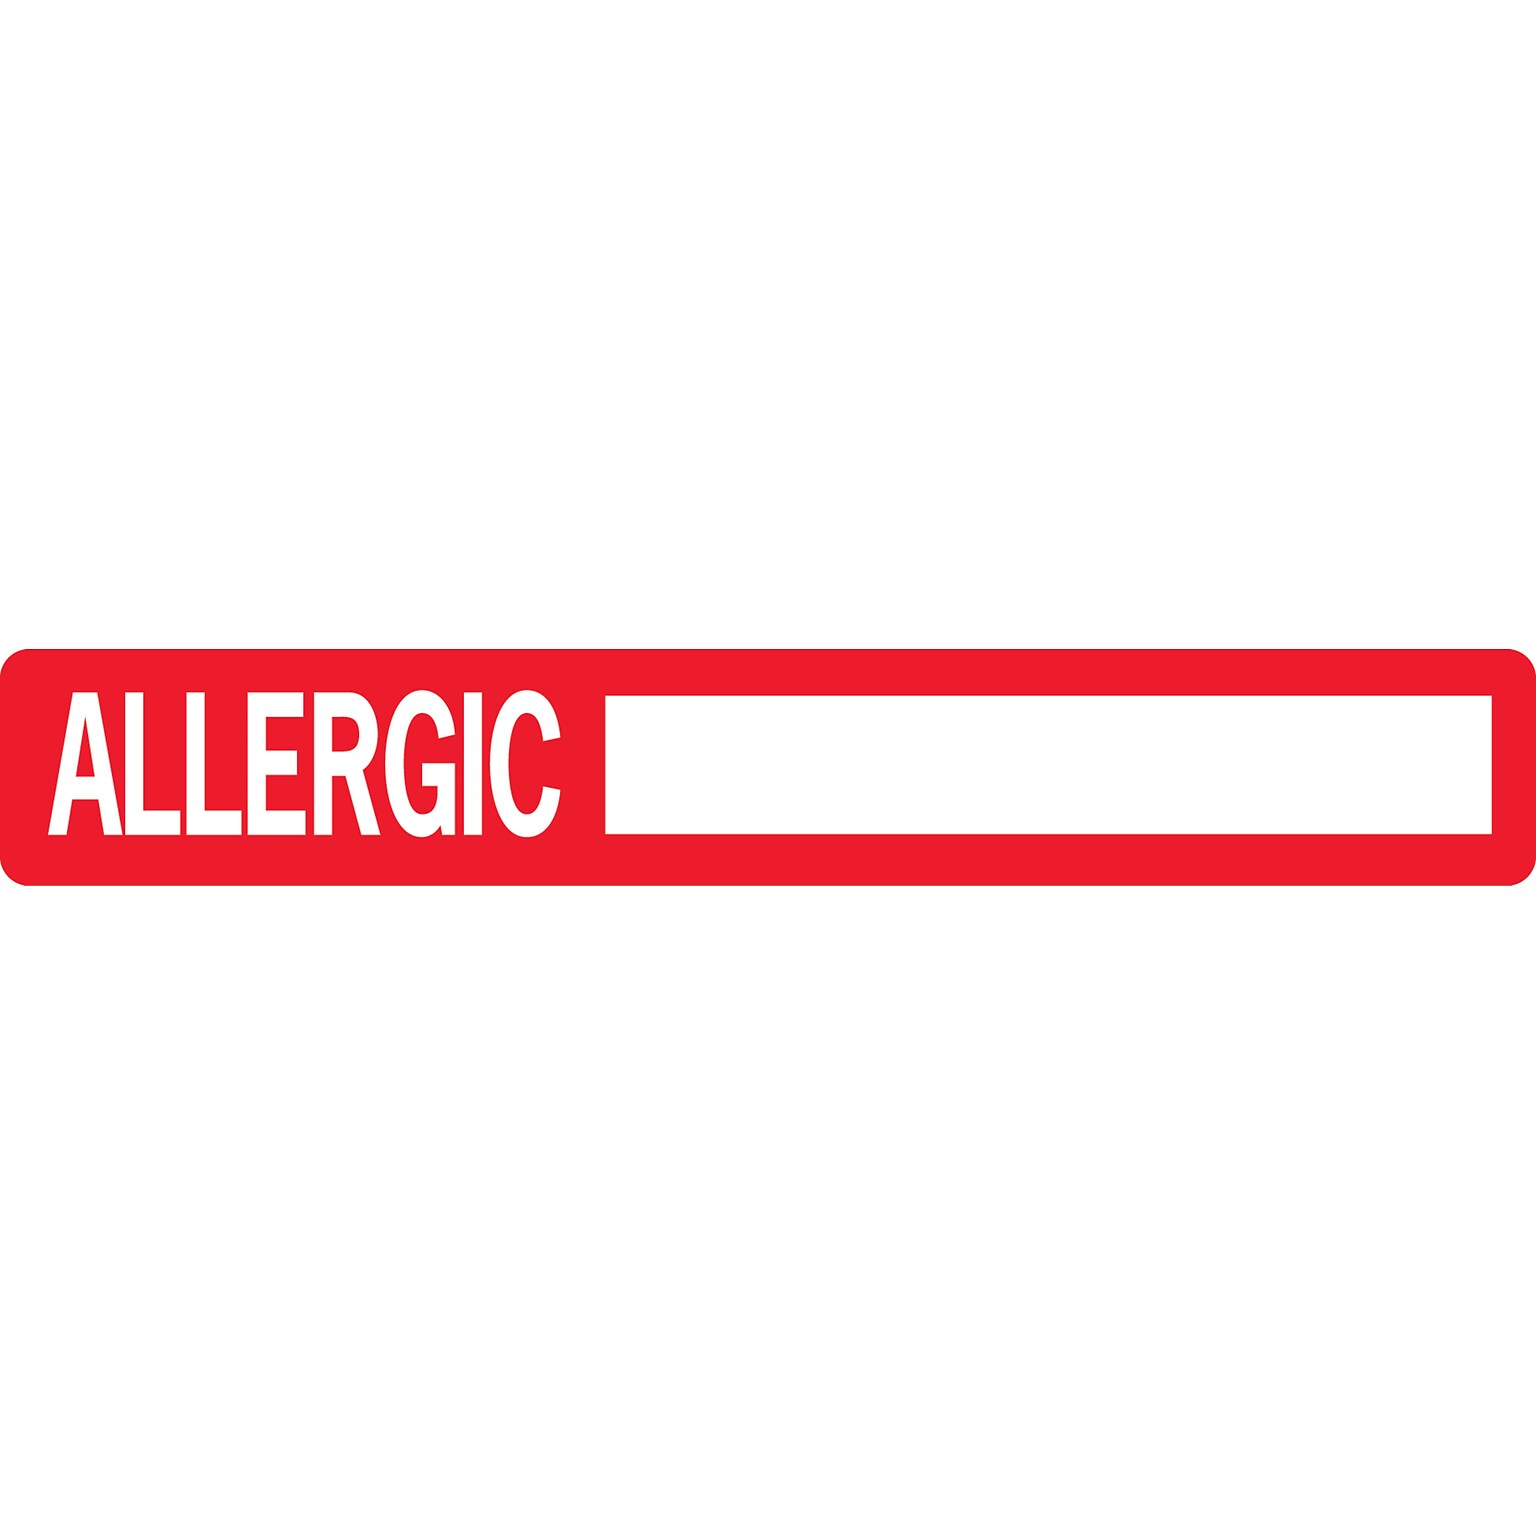 Allergy Warning Medical Labels, Allergic:, Red and White, 1x6-1/2, 100 Labels